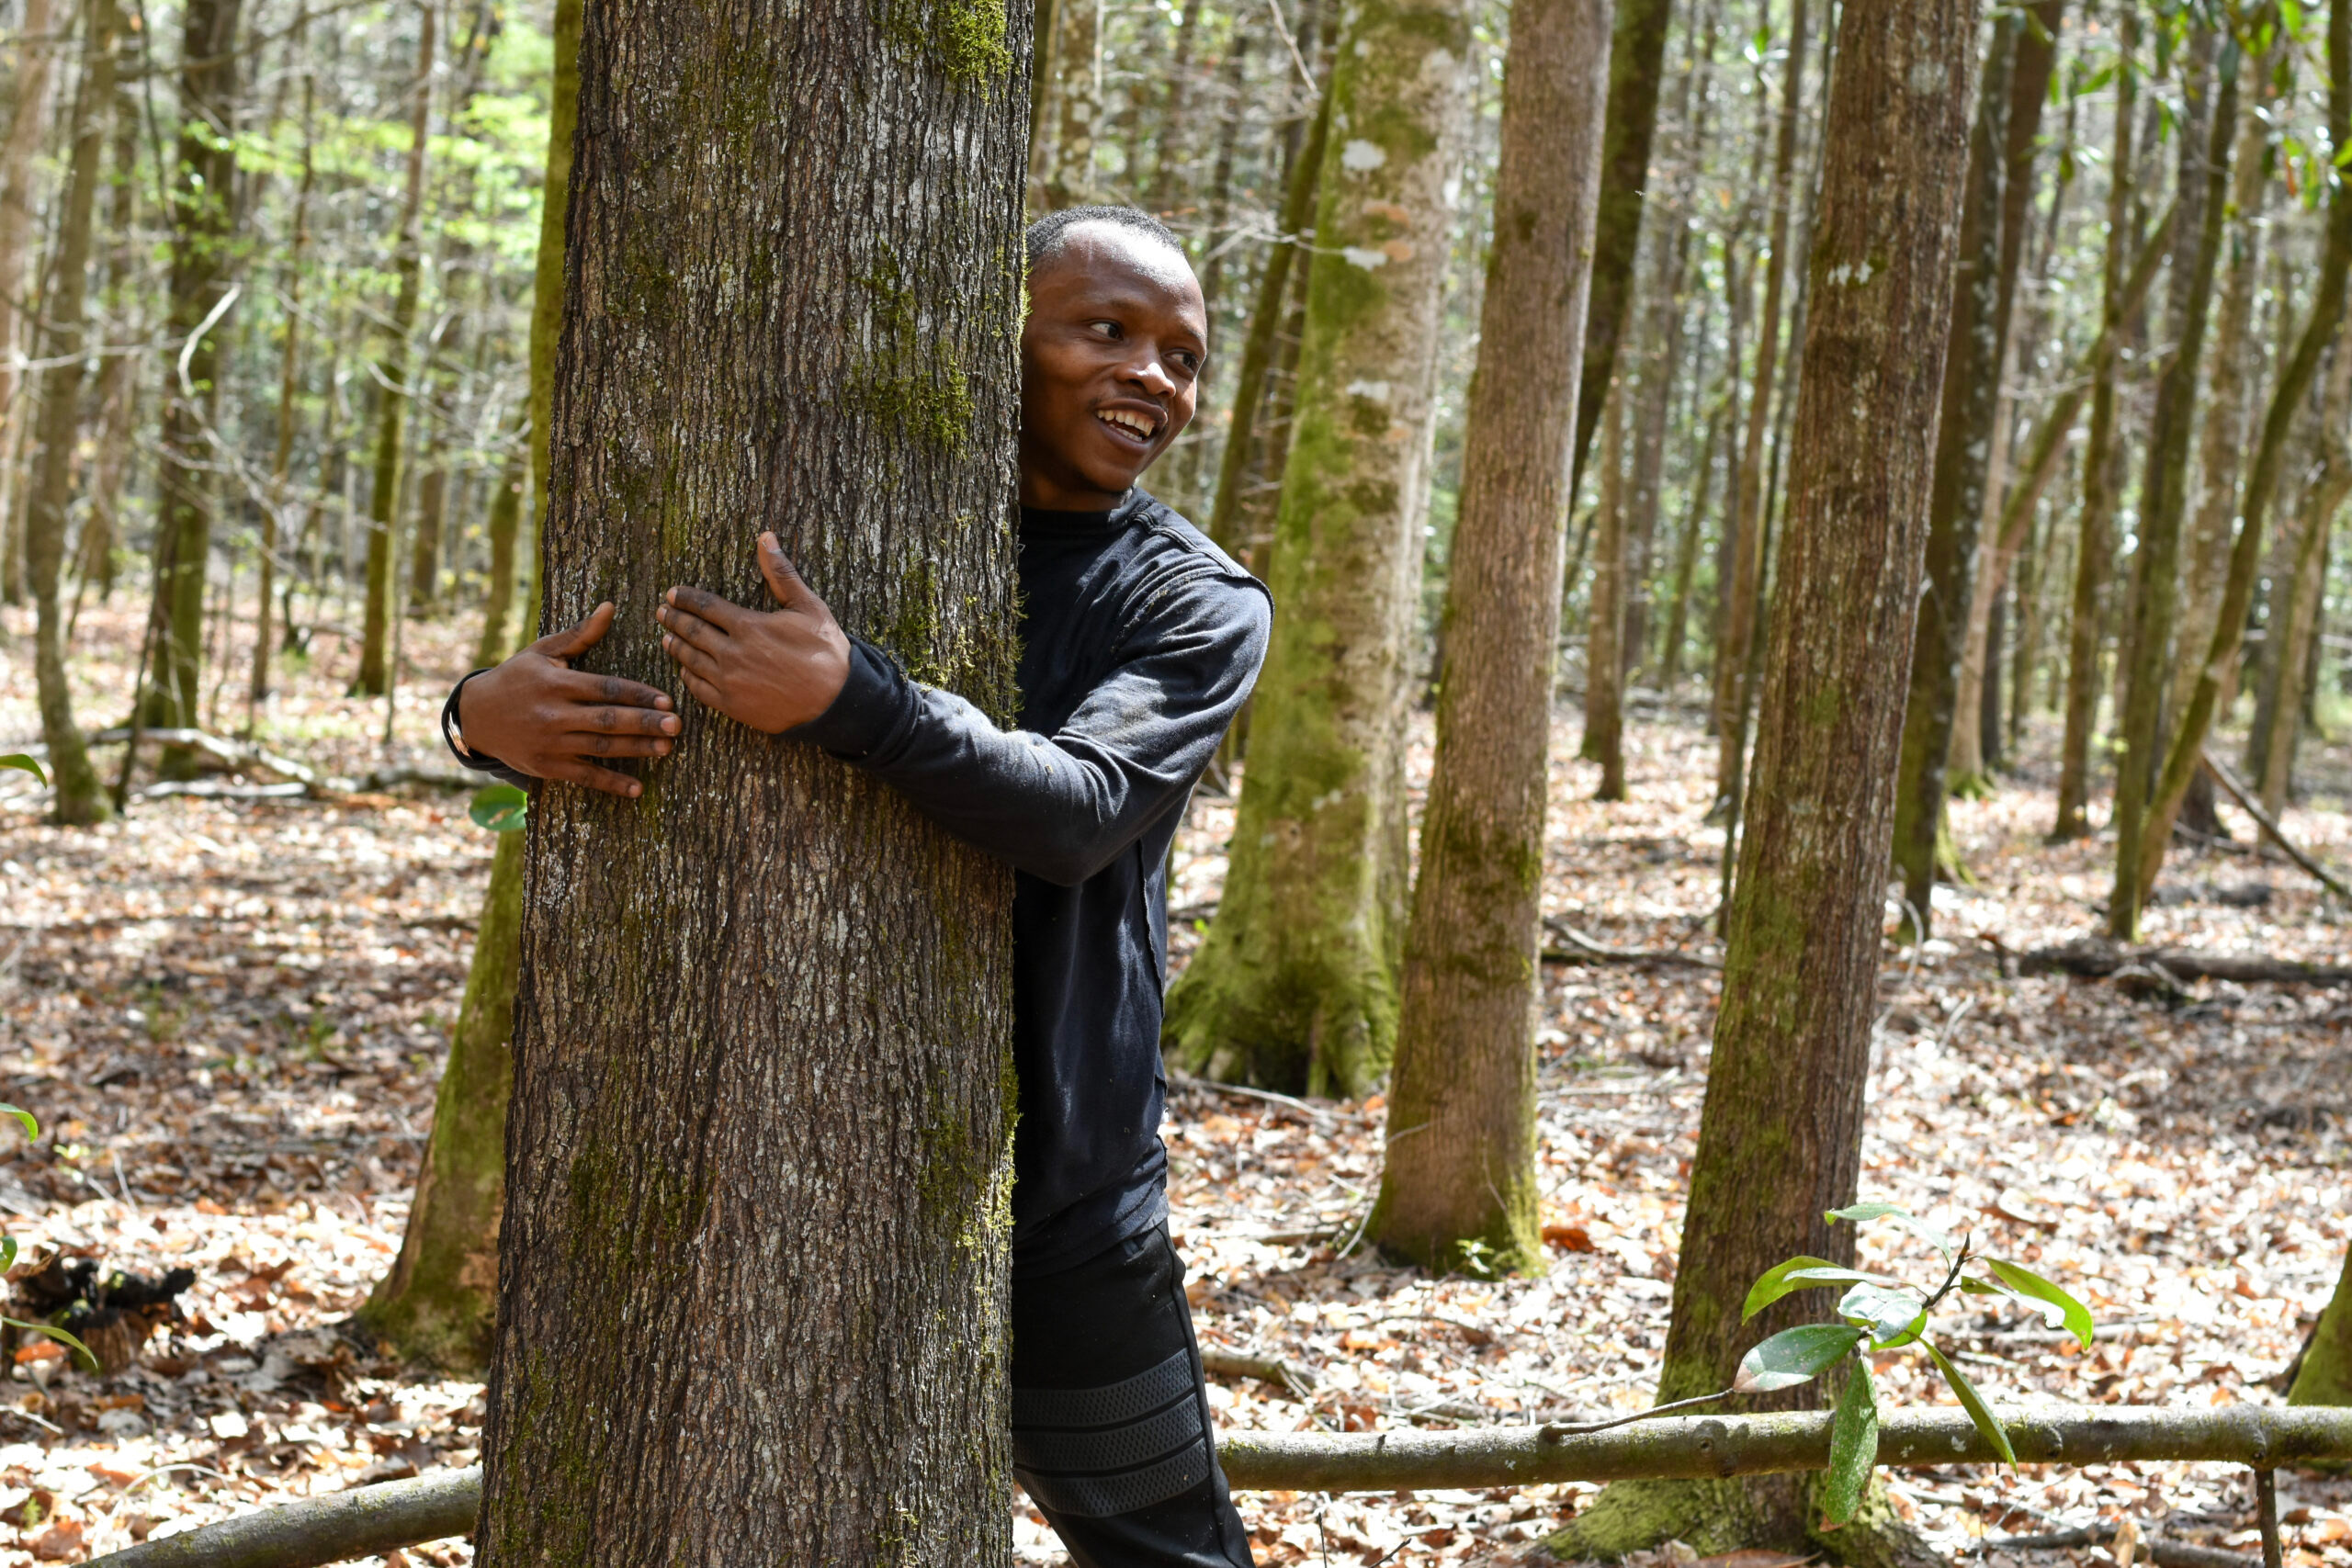 Abubakar Tahiru embraces a tree while attempting his world record tree-hugging goal.